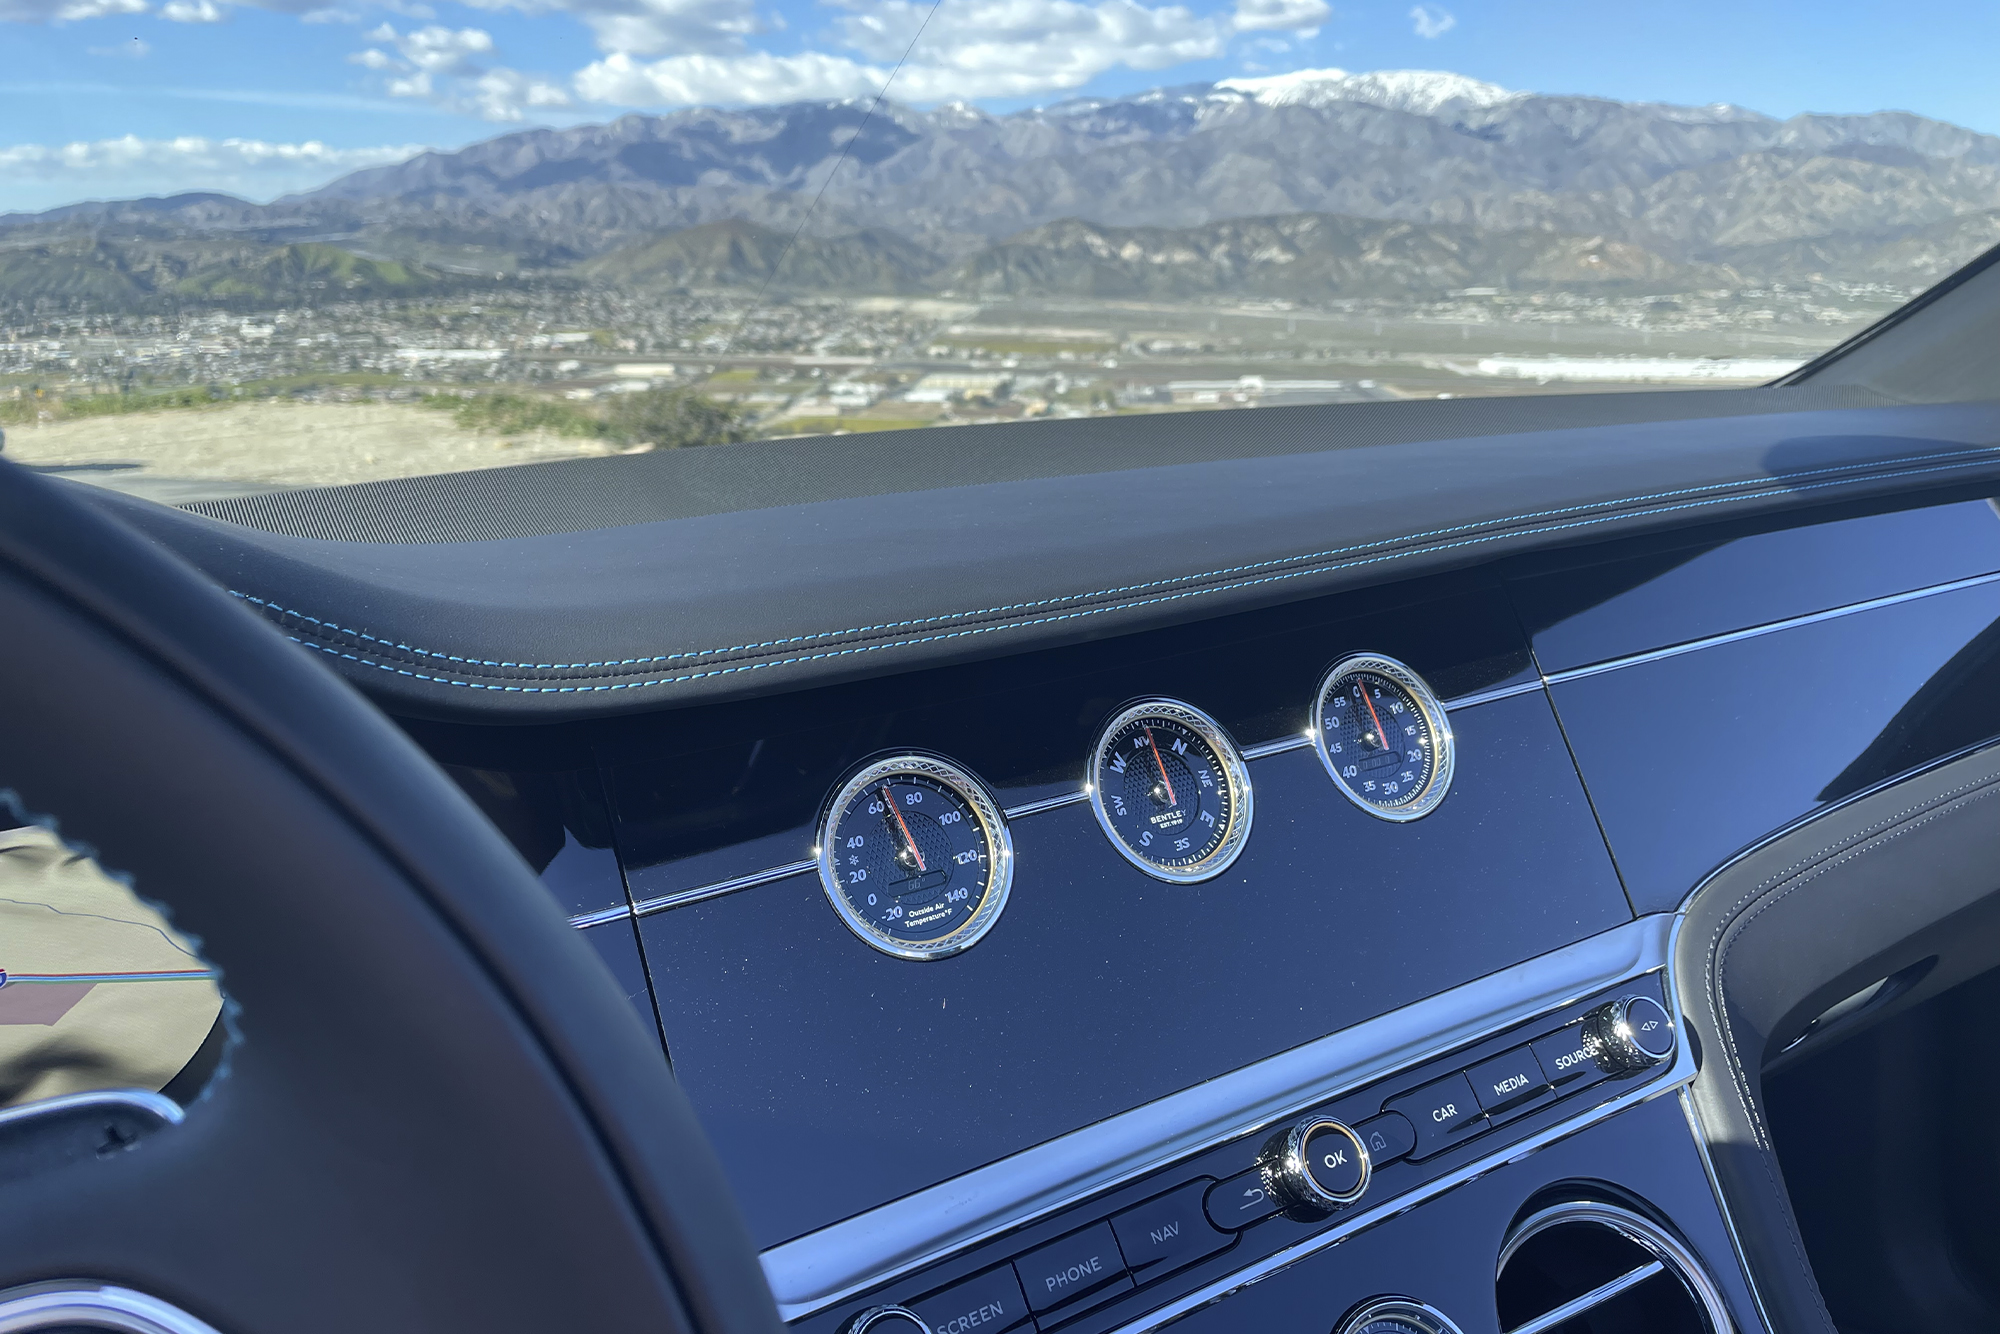 close-up dashboard view